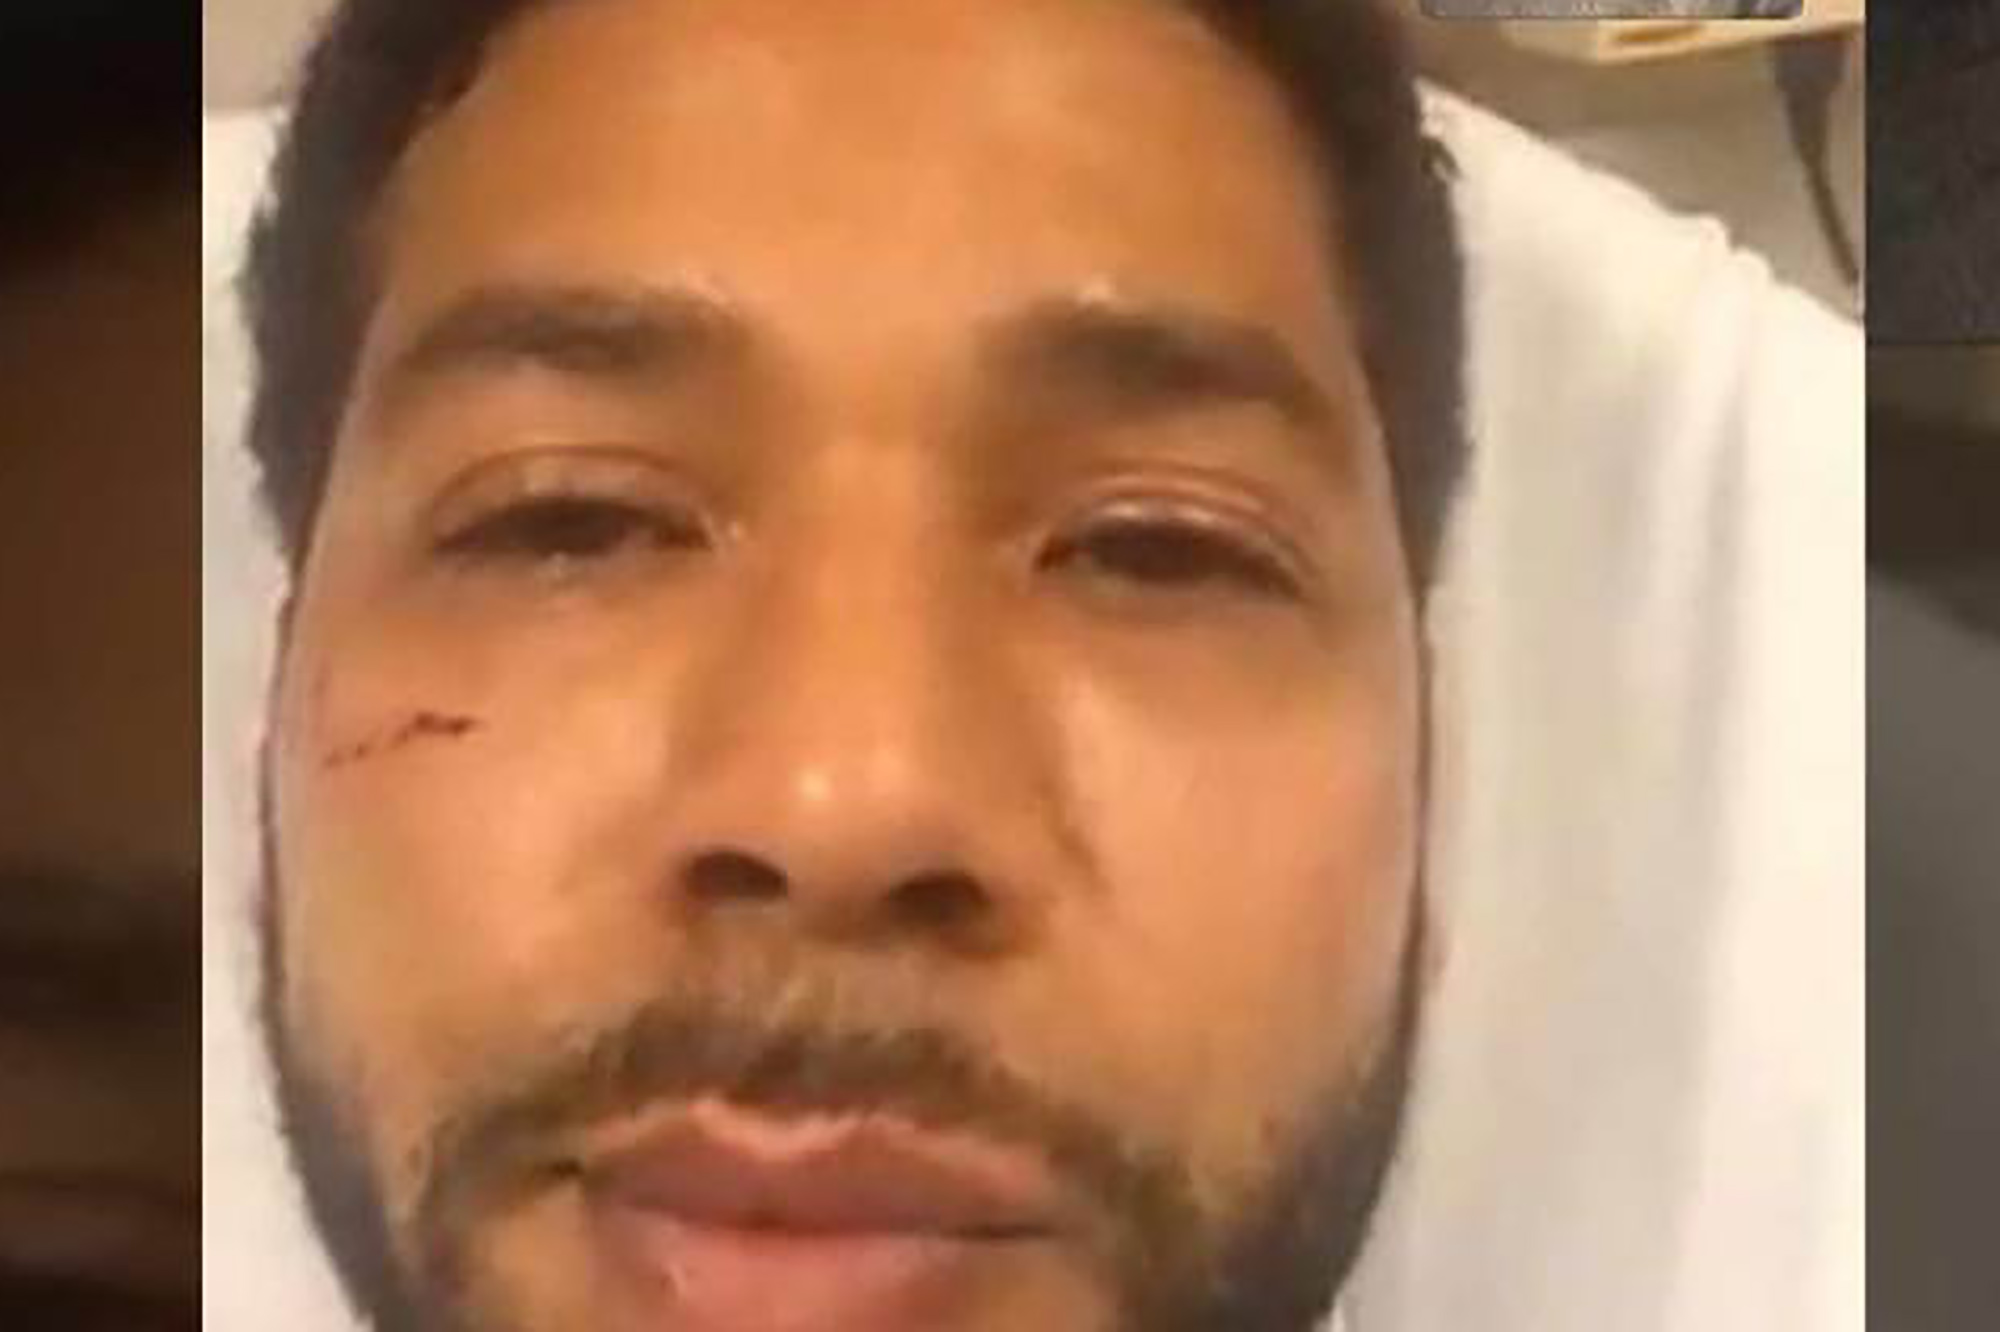 Director and Empire creator, Lee Daniels, shares a screen grab showing Jussie Smollett's injuries obtained during an alleged biased hate crime attack on the 300 block of East North Lower Water Street, Chicago, on January 28, 2019.